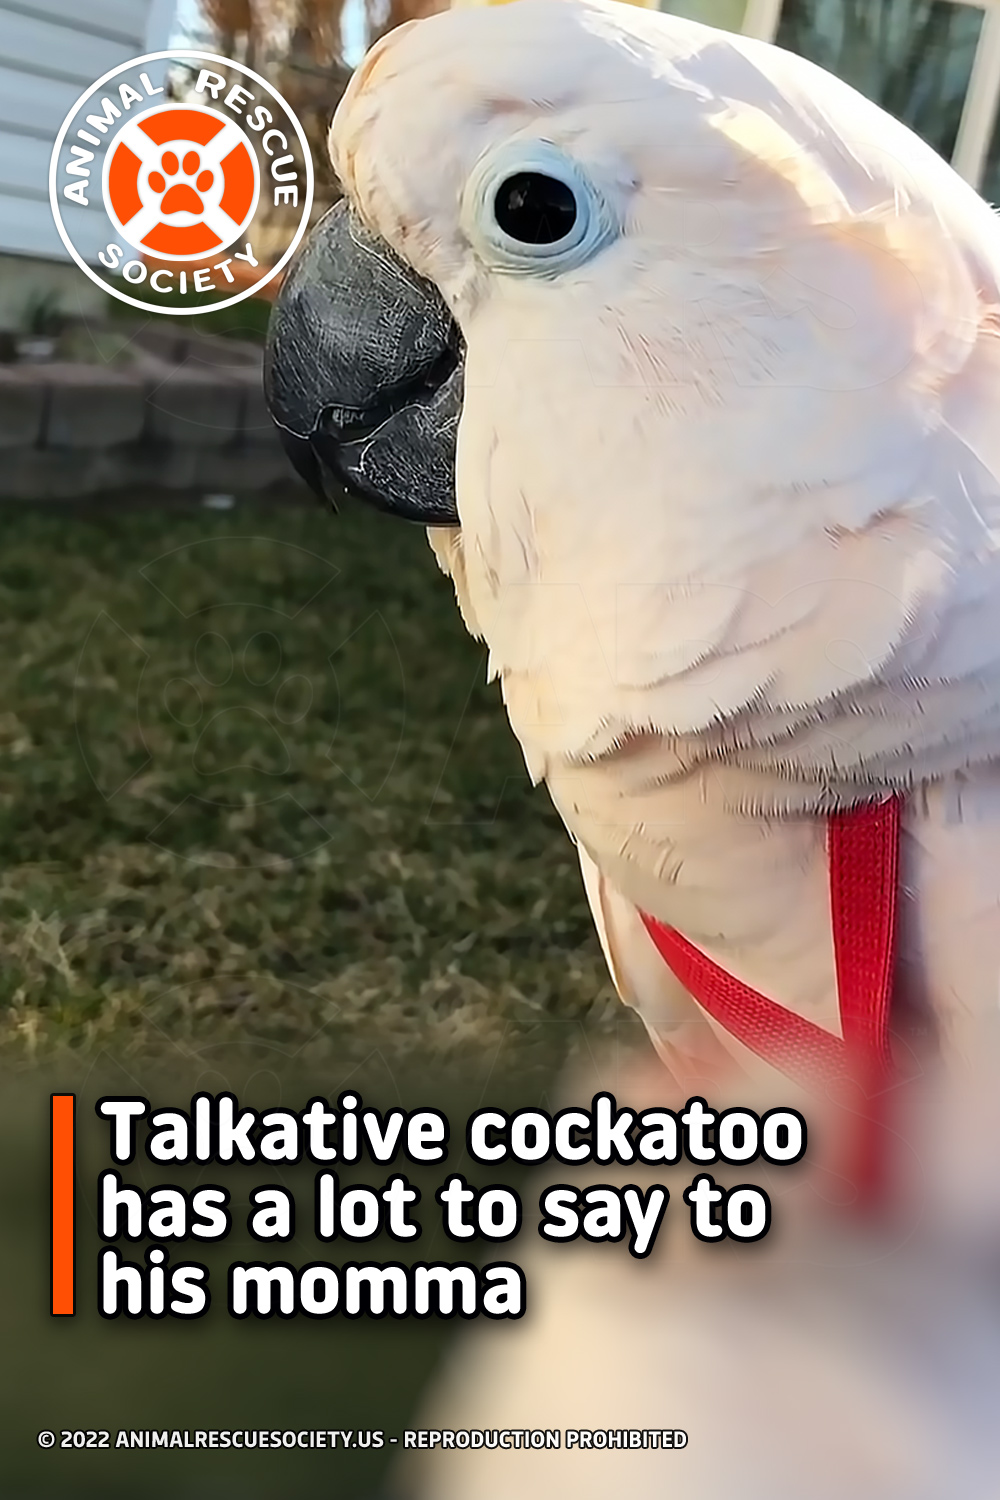 Talkative cockatoo has a lot to say to his momma